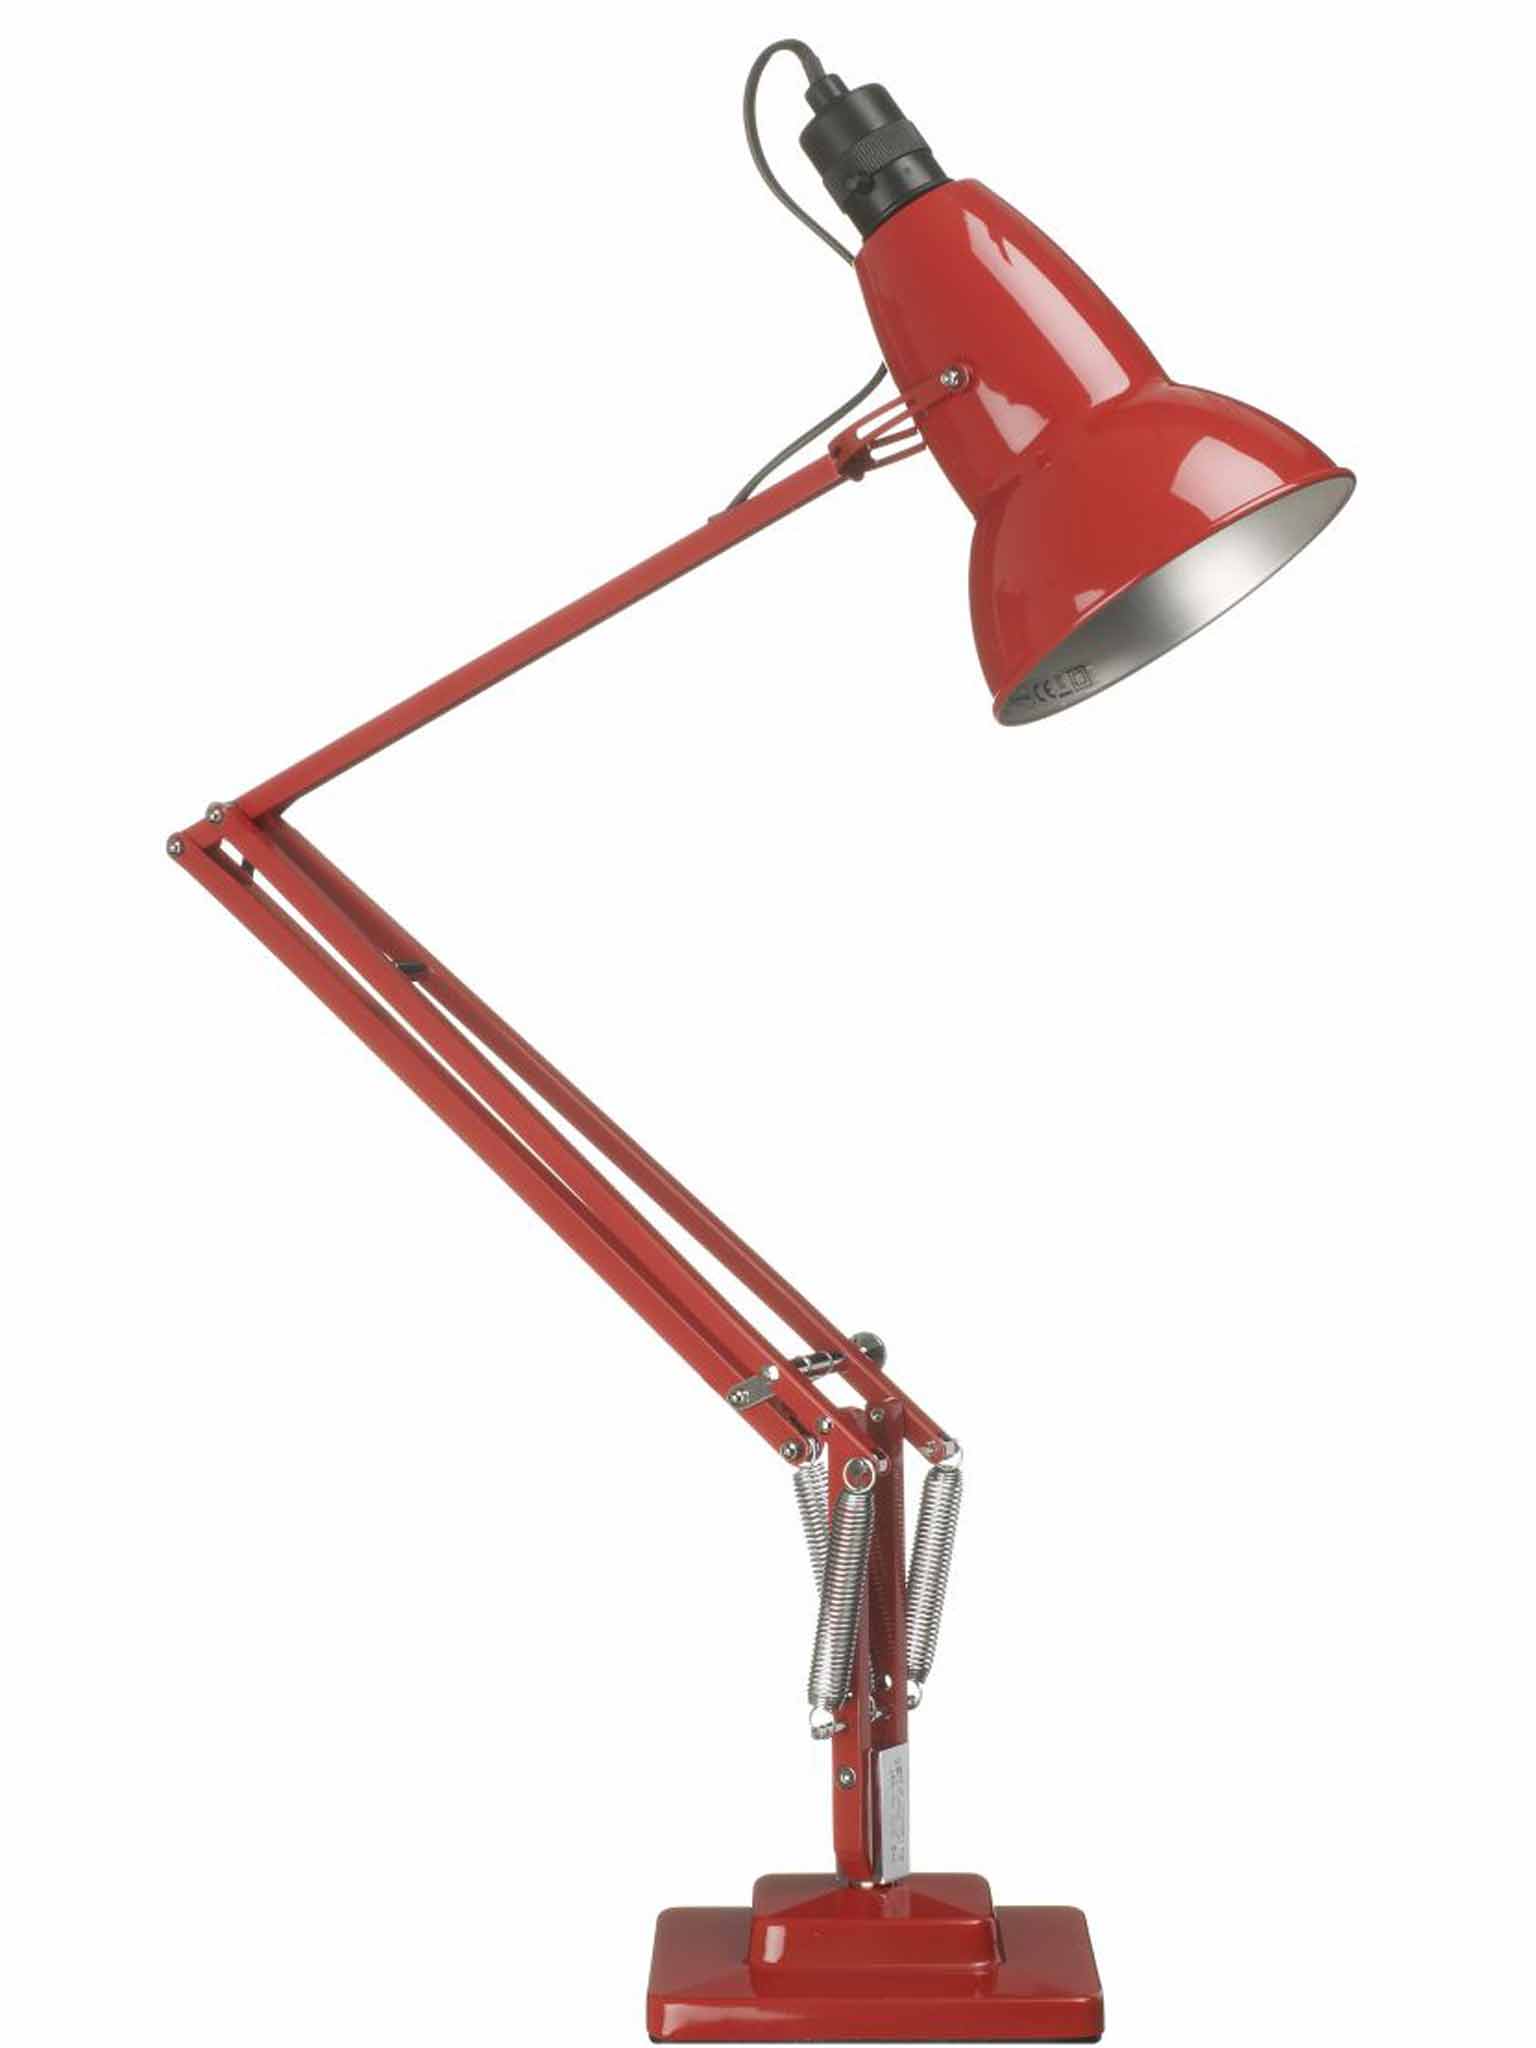 &#13;
Anglepoise lamp: Out of copyright&#13;